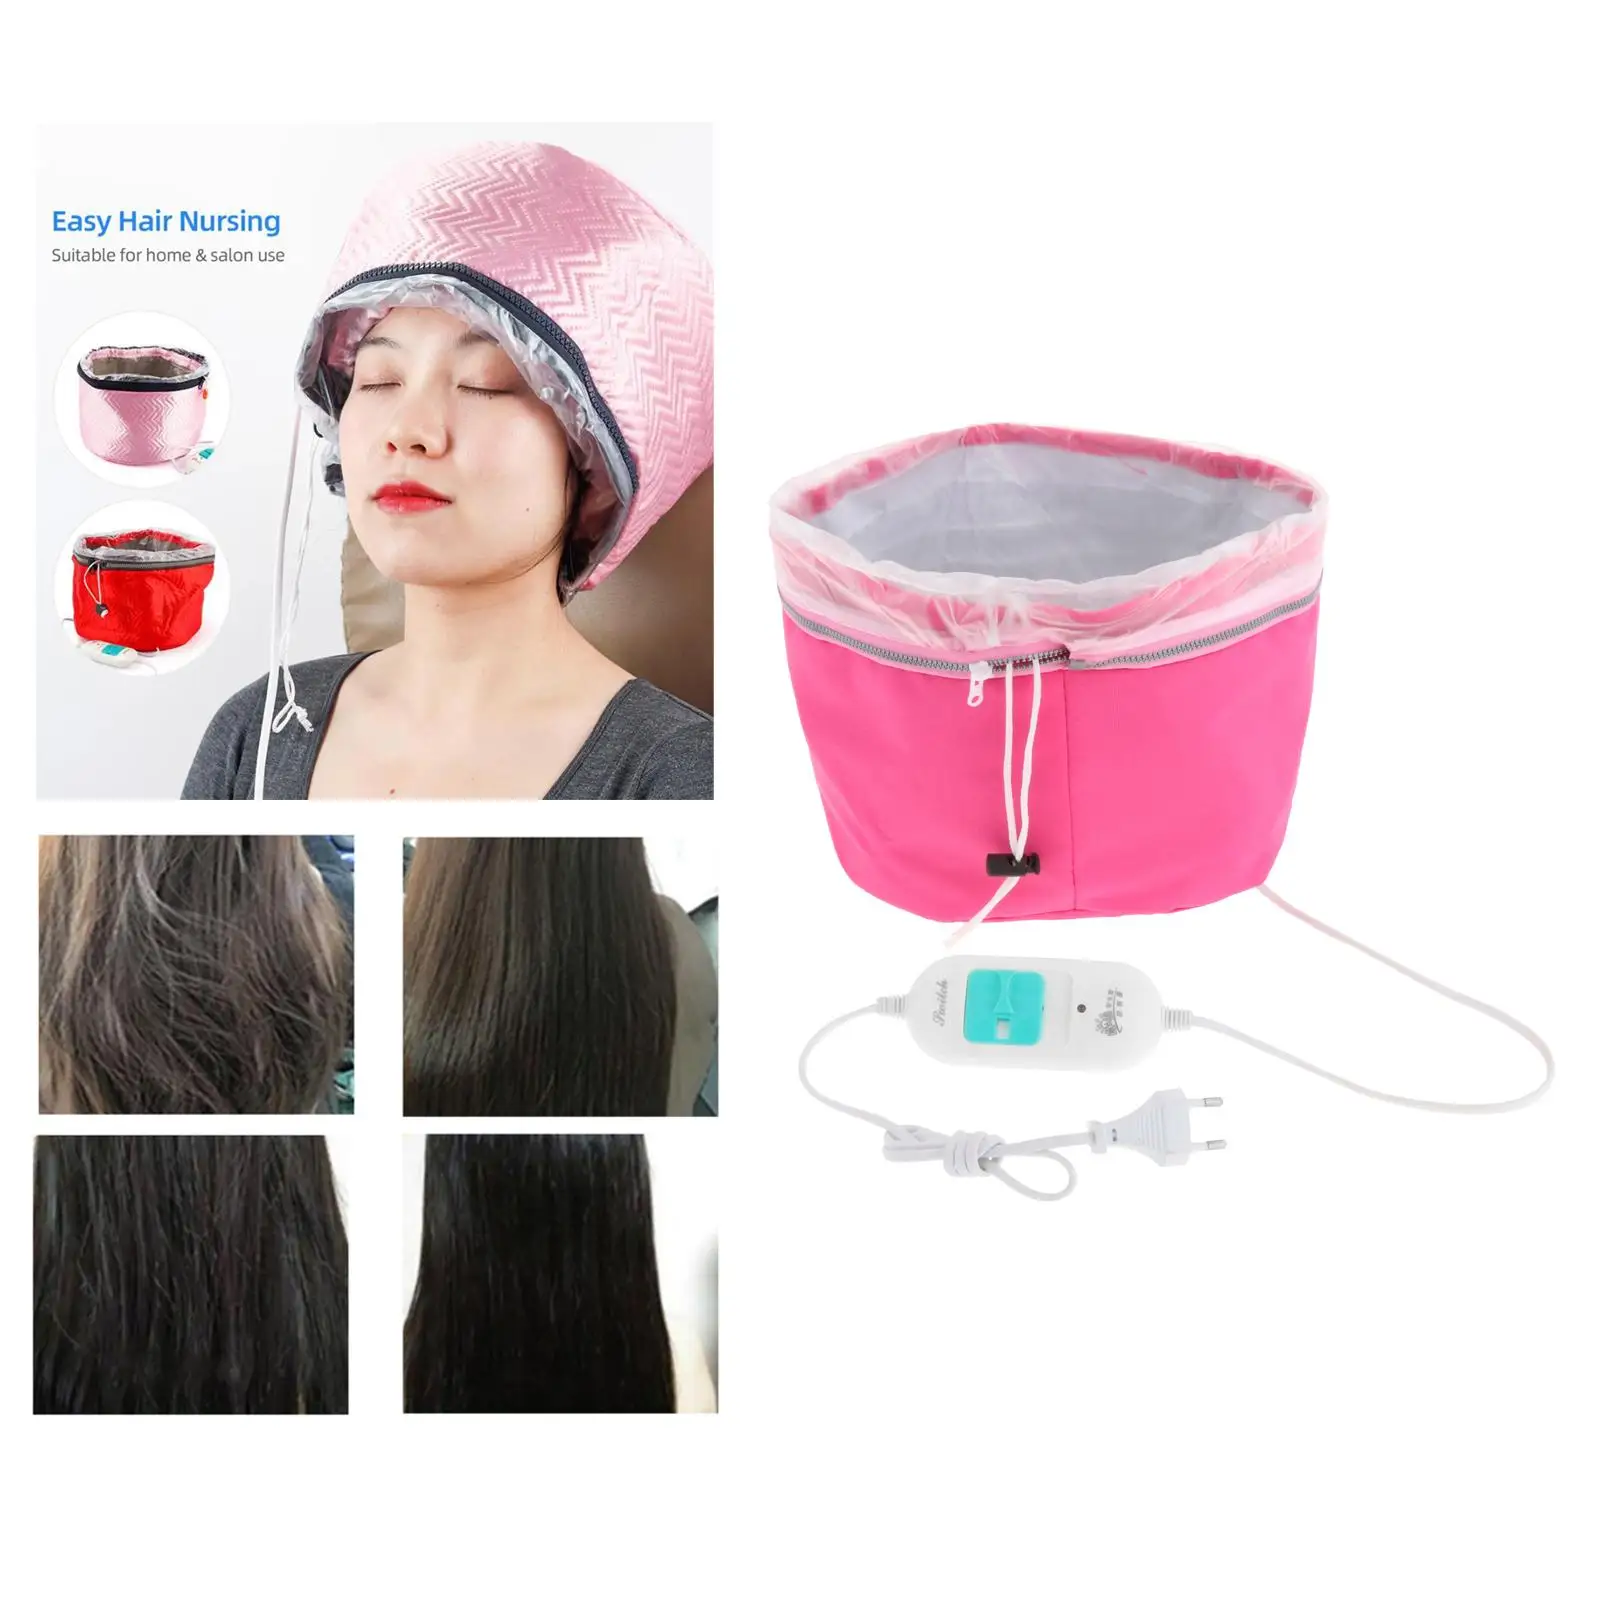 Electric Hair CAPs 220V Portable Scalp Treatment for Home Use Head Care Heating CAPs Baking Oil CAPs Intelligent Protection